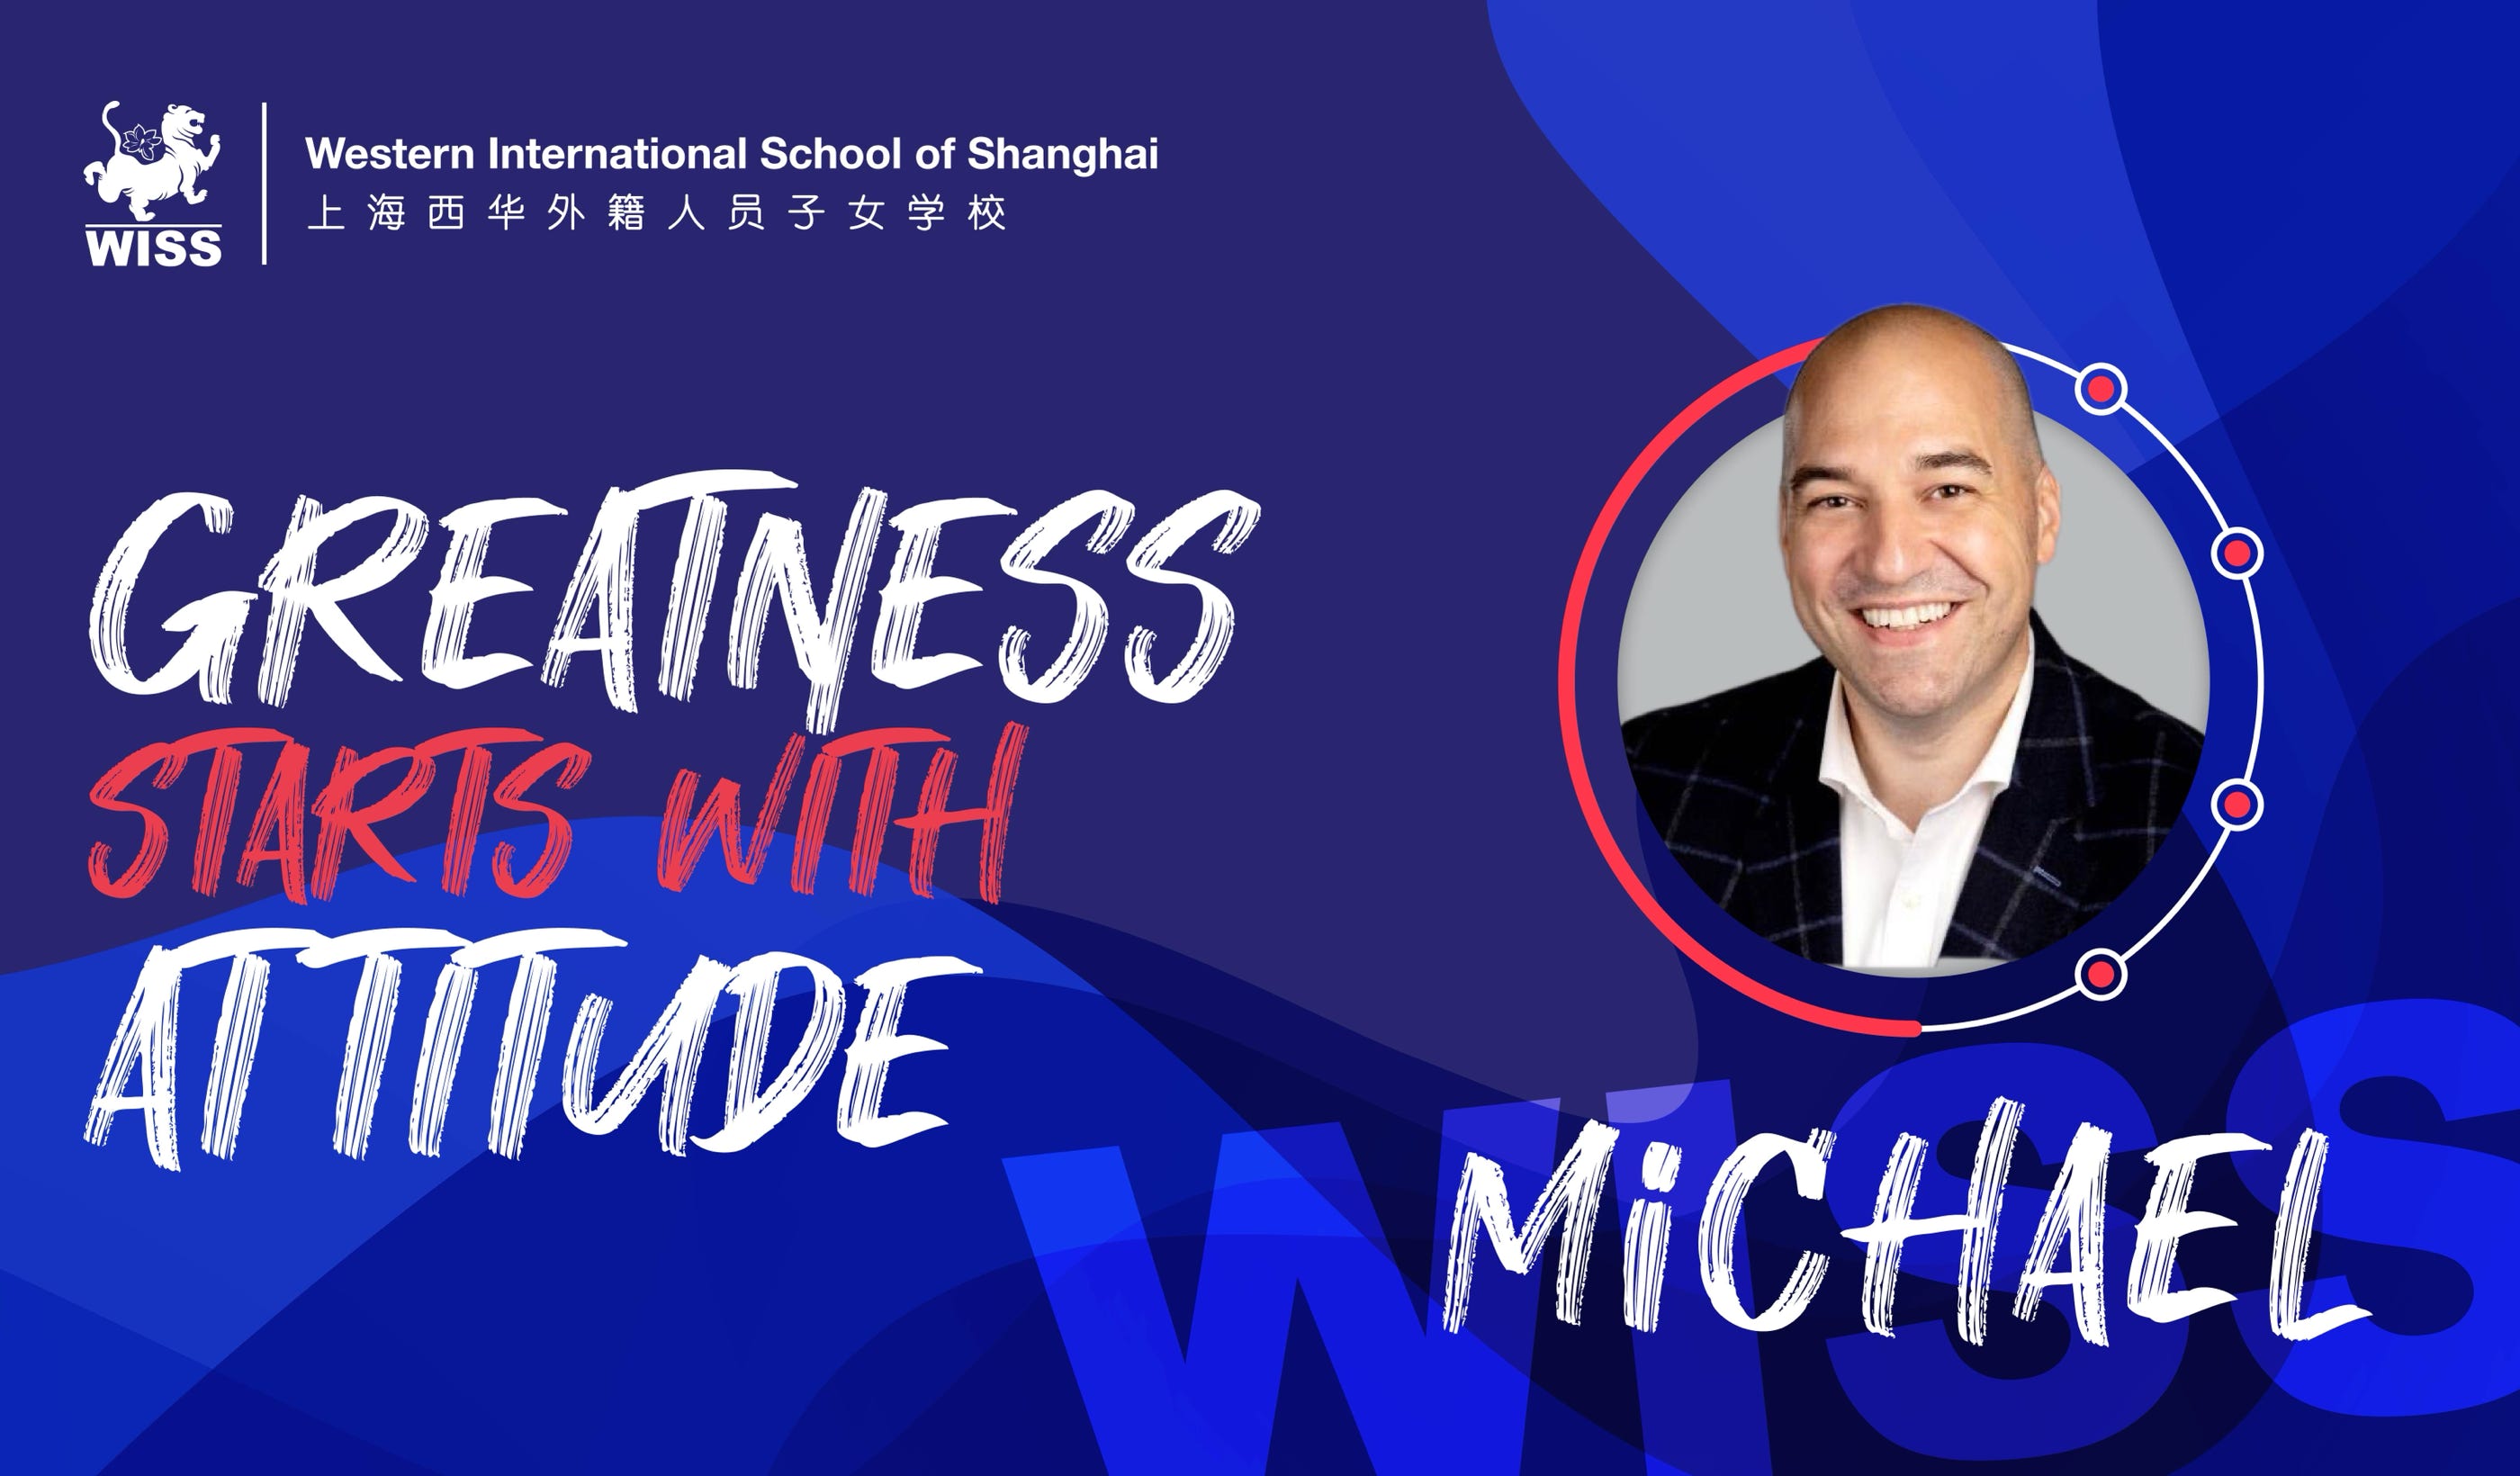 In the next installment of our Greatness Starts With Attitude series, we connect with a proud WISS parent and international business leader, Michael Oviedo. Michael is from the United States and is the United States, and his two children have been part of the Western International School of Shanghai community for the past couple of years.   His journey has been a winding path shaped by experiences, aspirations, and unexpected twists. From his early dreams of becoming a college professor to his current role as an industry leader in the collectibles and authentication industry, he has learned that greatness does indeed start with one’s attitude.